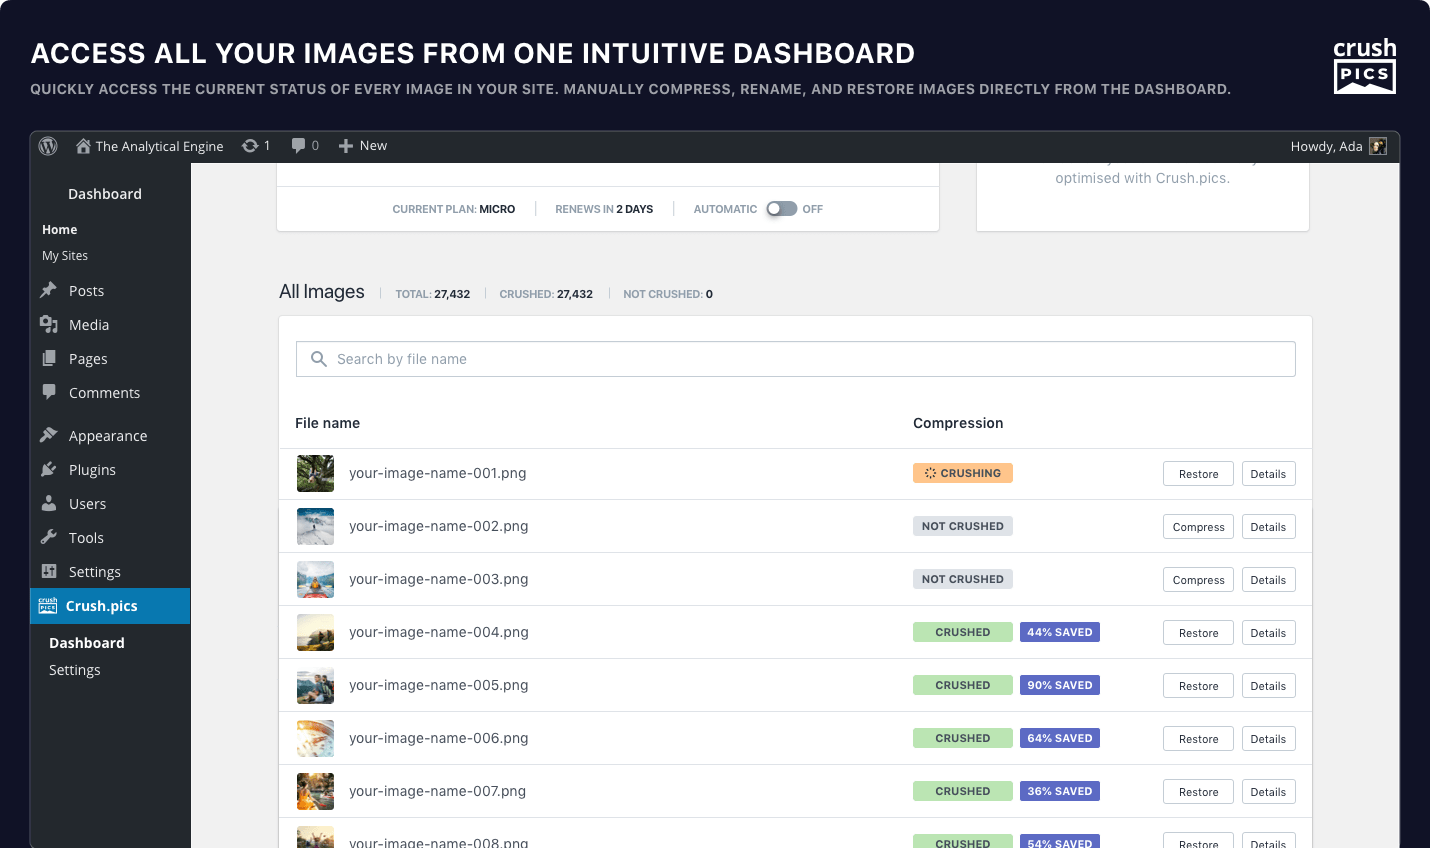 Access all your images from one intuitive dashboard